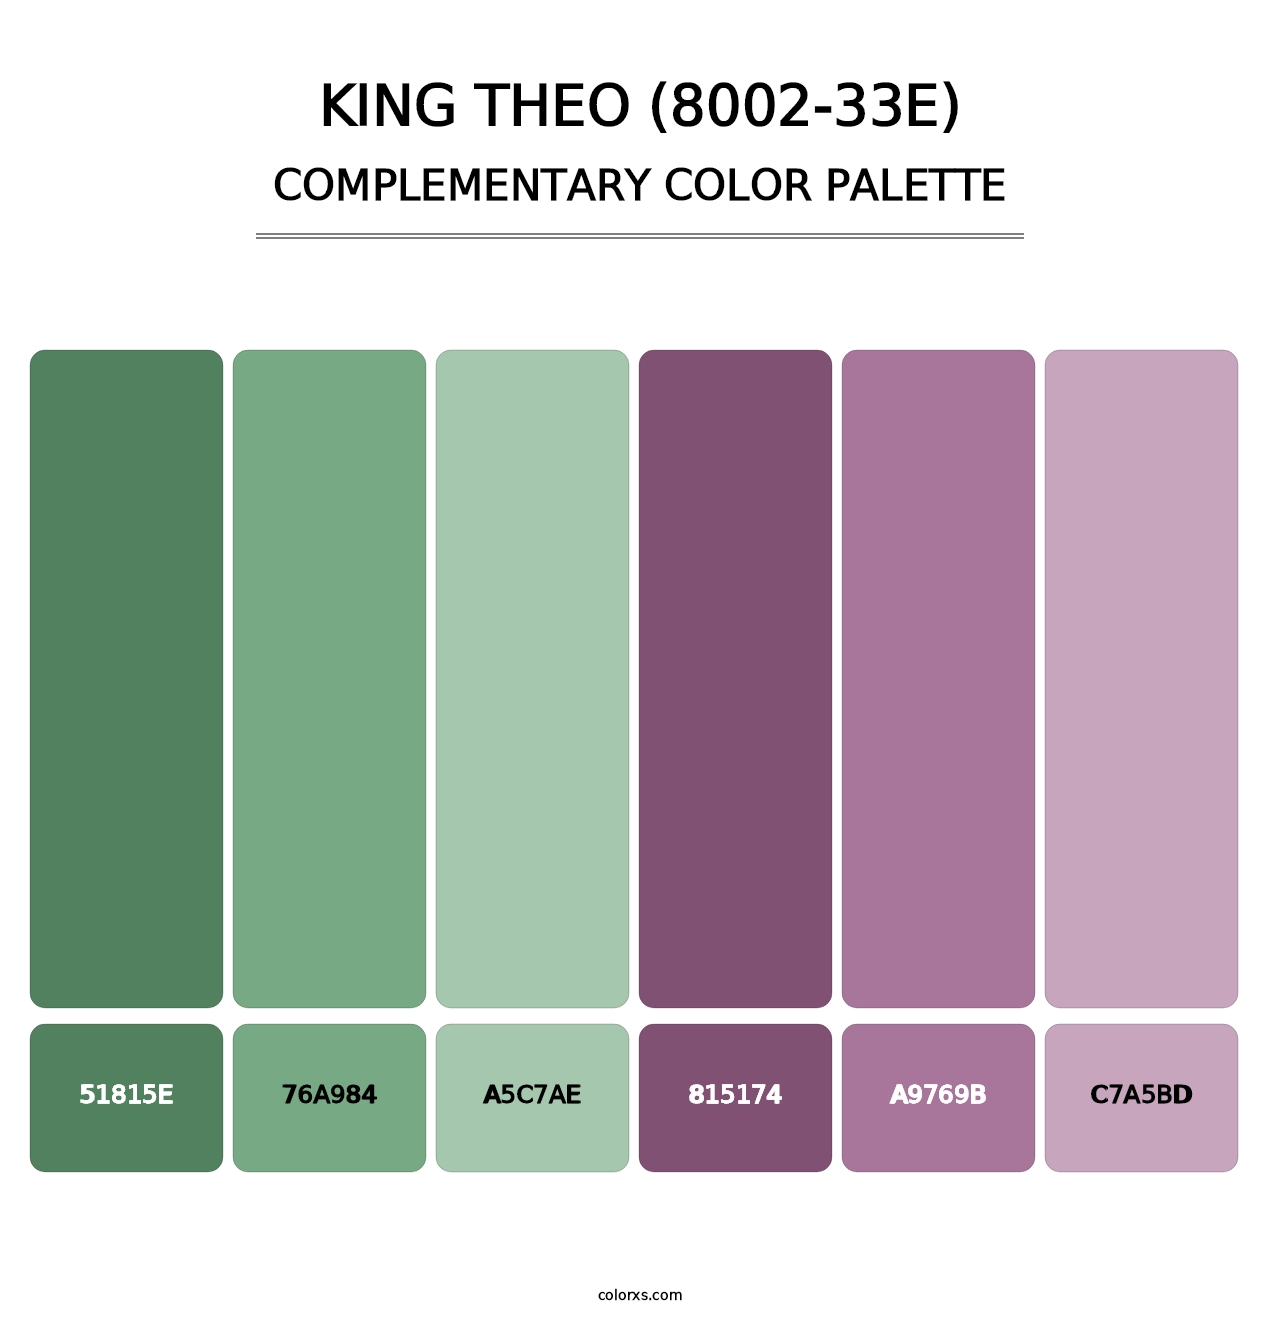 King Theo (8002-33E) - Complementary Color Palette